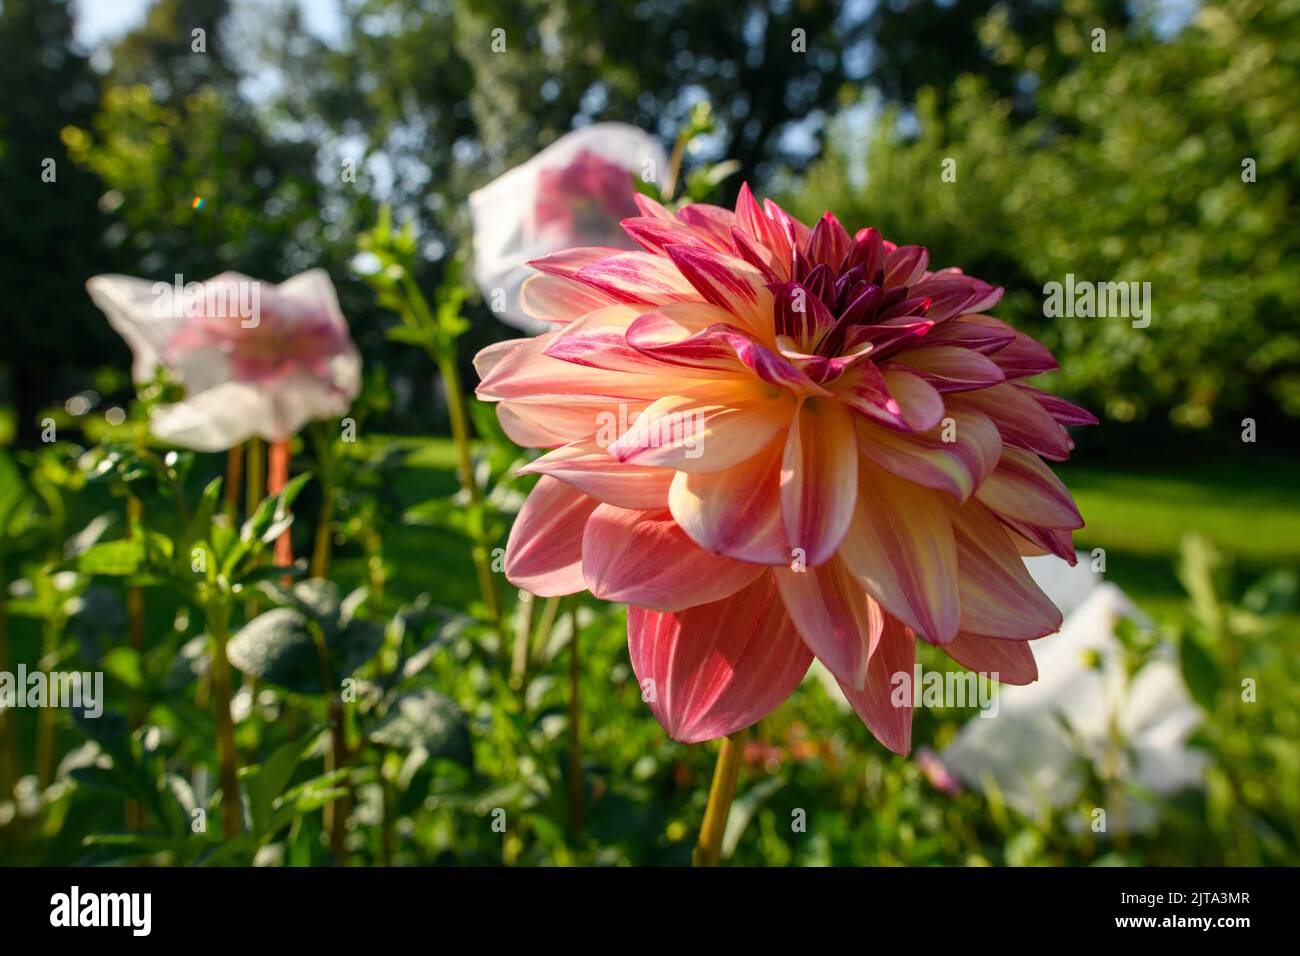 Happy Butterfly Dahlias. Beautiful large multi colored dahlias flowerbed. Ornamental cutting garden. Stock Photo